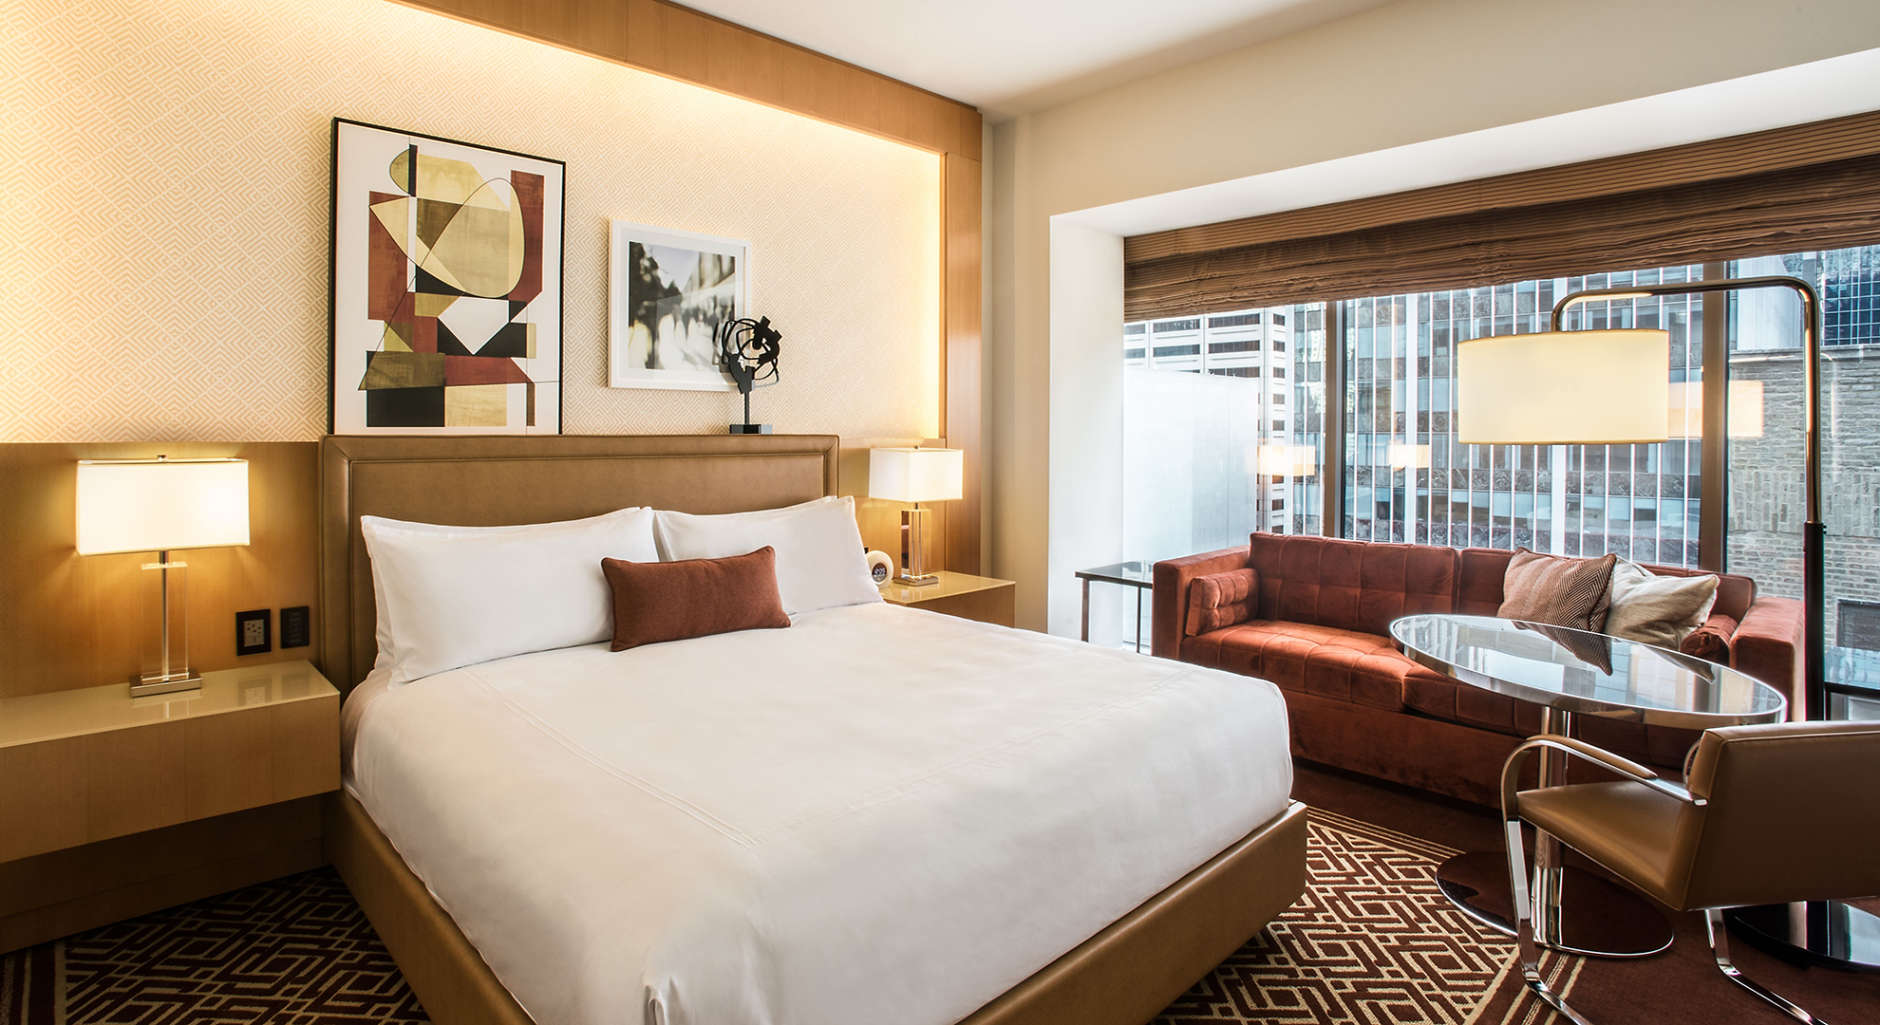 The Conrad Chicago has pillow options including a "Coild and Flu Pillow" infused with eucalyptus, tea tree, bergamot and sandalwood. (Courtesy The Conrad Chicago)